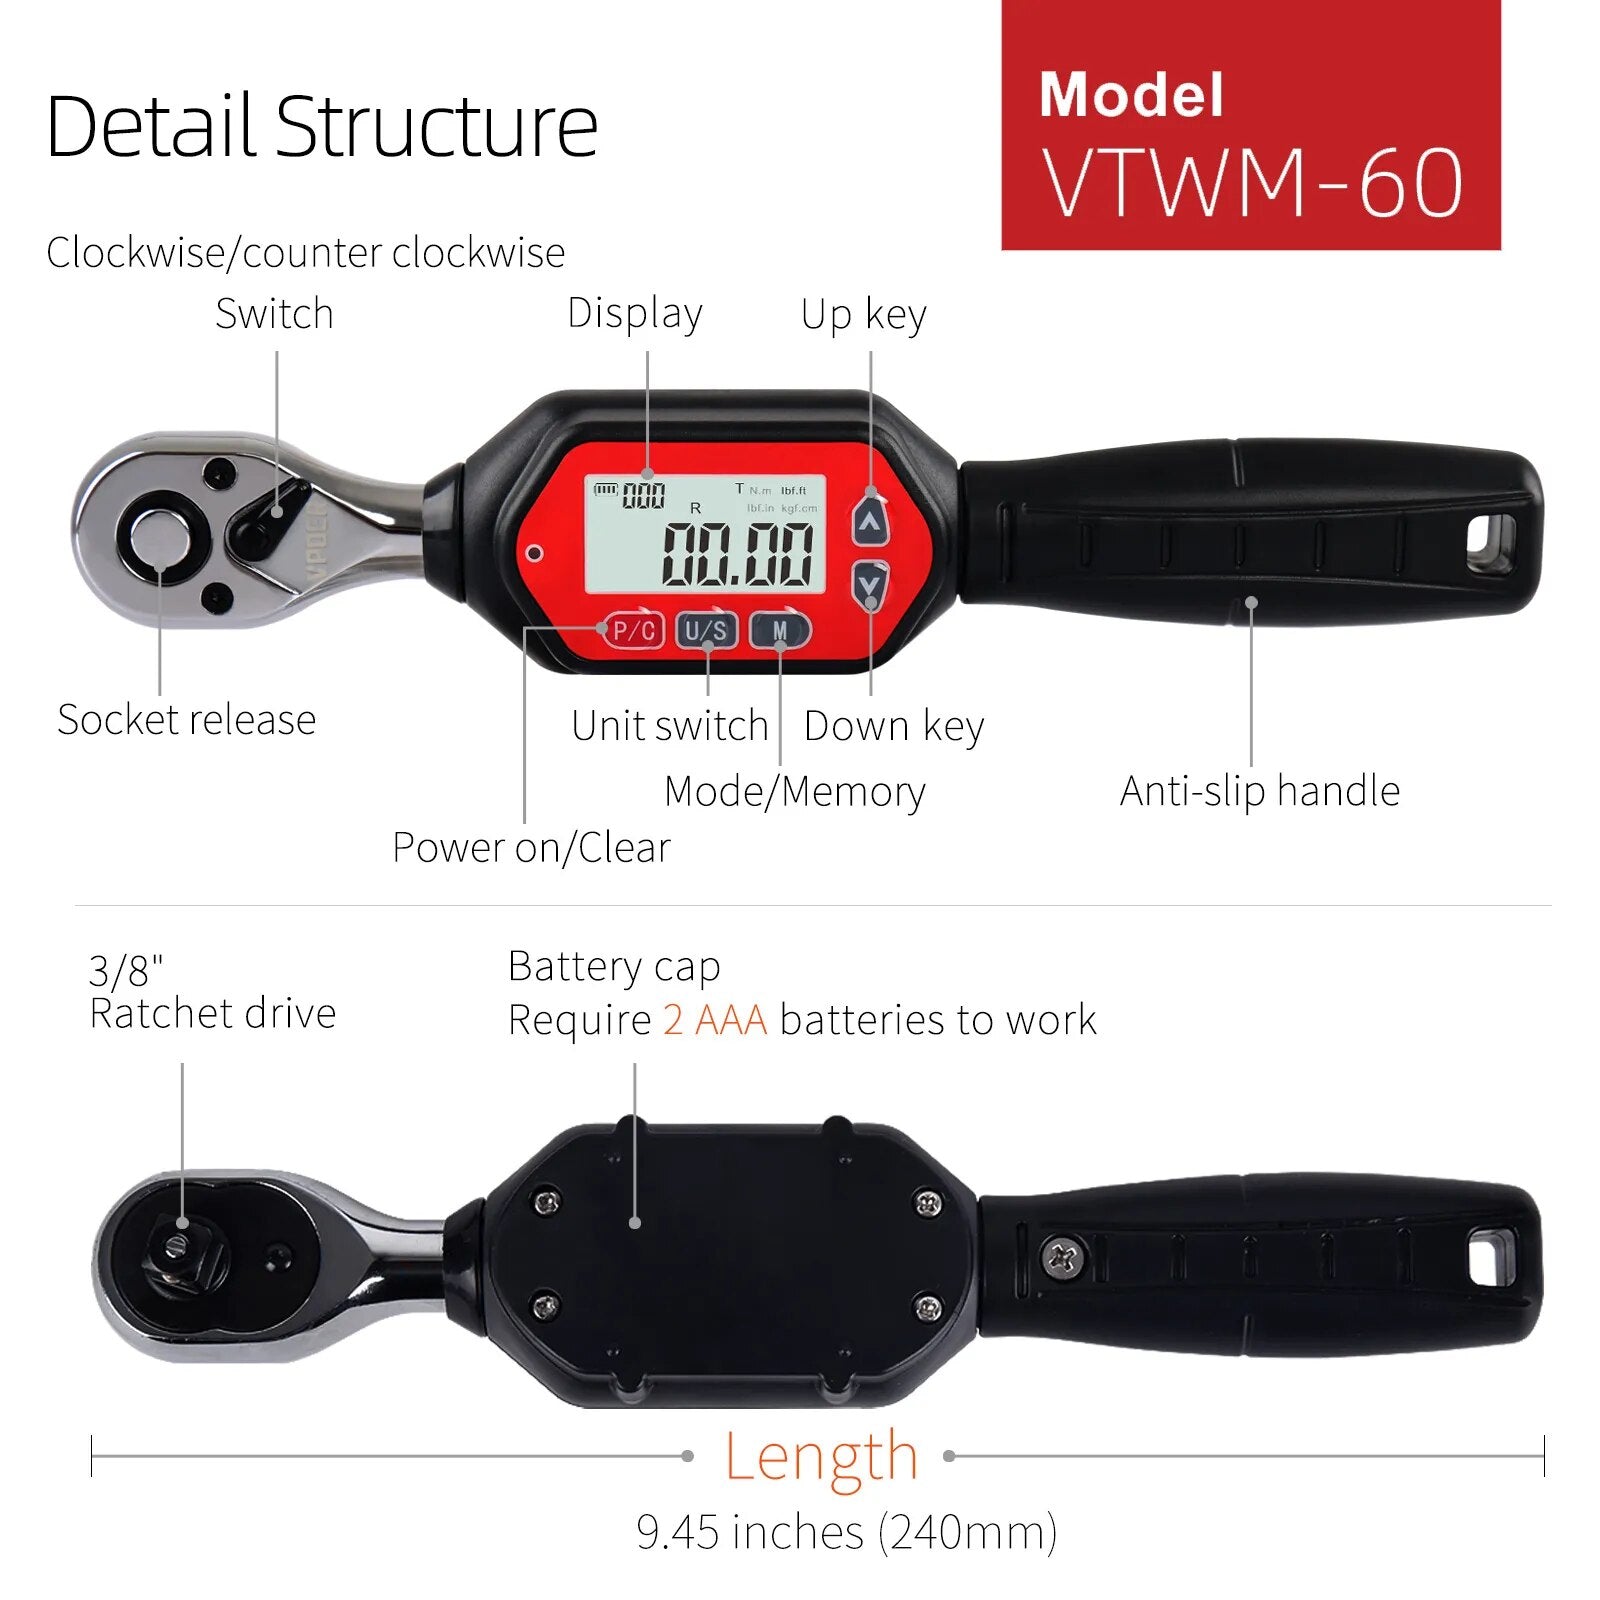 Digital Torque Wrench with Buzzer & LED, Calibrated